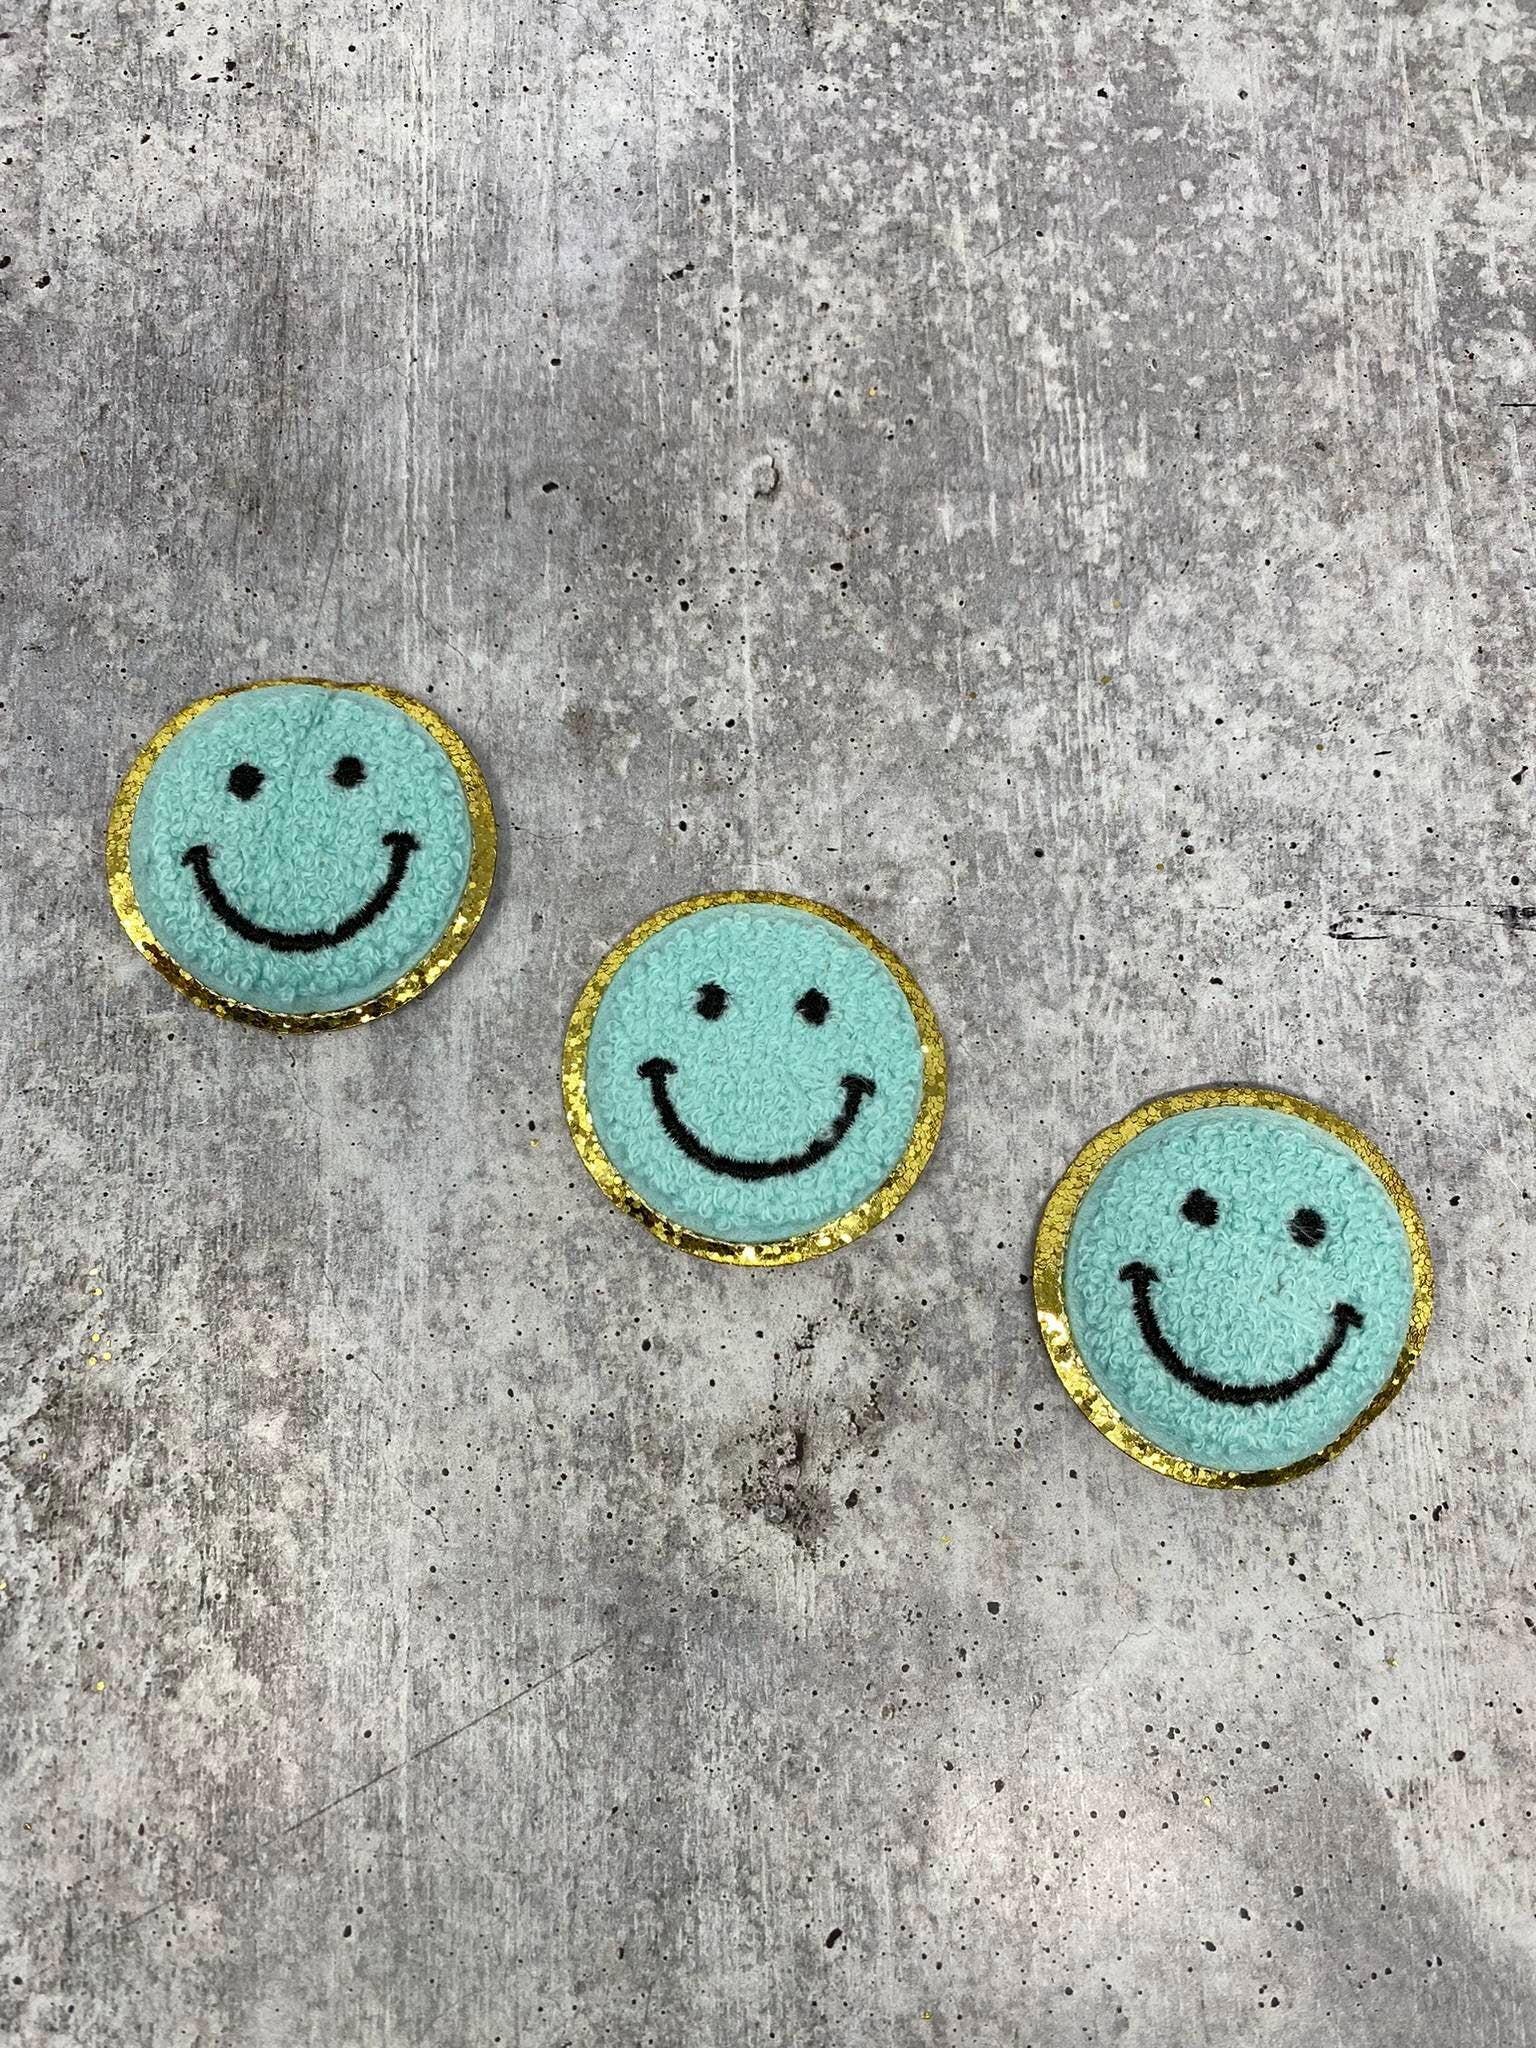 Sequin Smiley Face Patch - 2.75